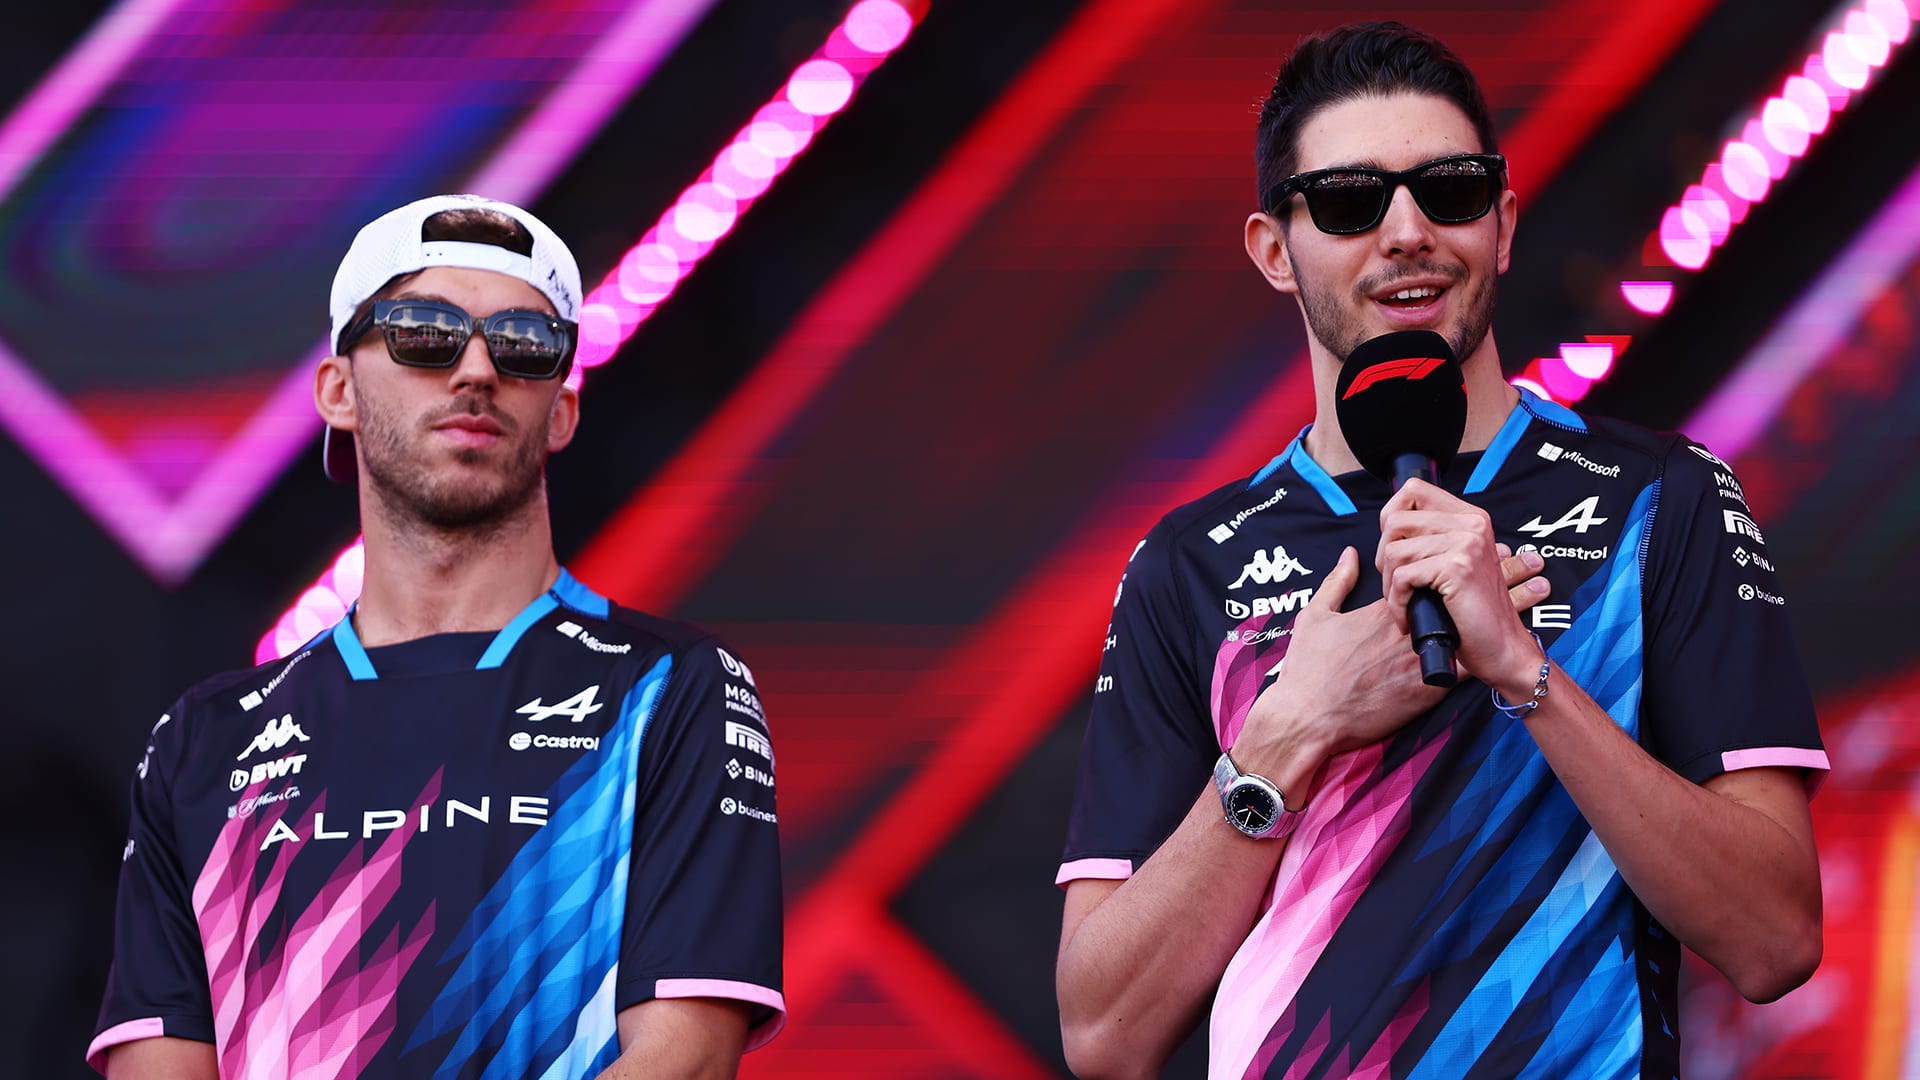 Ocon boosted by new Alpine signing David Sanchez as Gasly expects ex-Ferrari man to be ‘full of ideas’